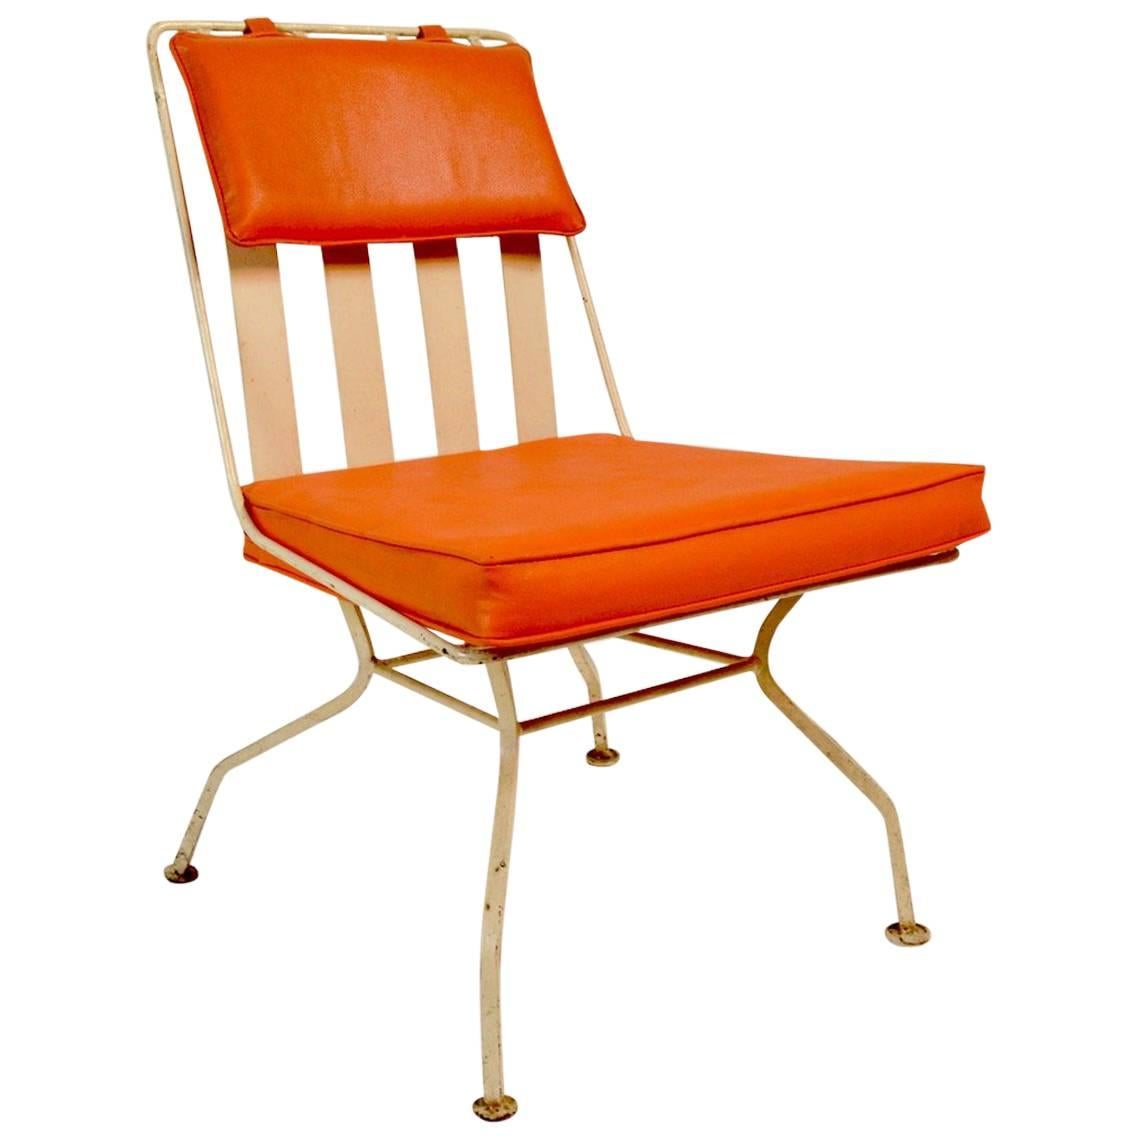 Woodard Chair with Orange Seat and Back Pad